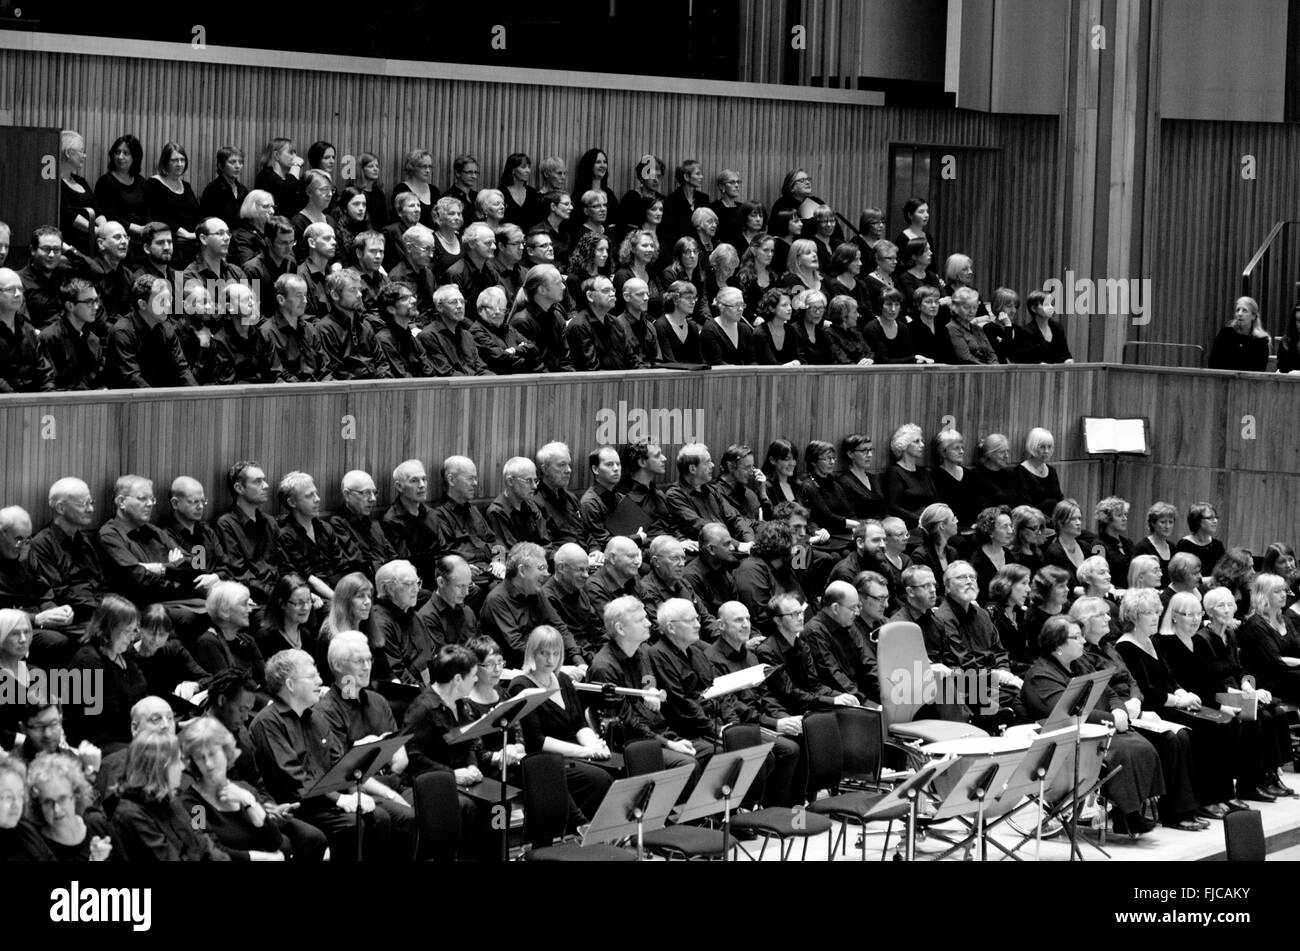 Black and white photo of a choir and part of an orchestra in the Southbank Centre's Royal Festival Hall Stock Photo